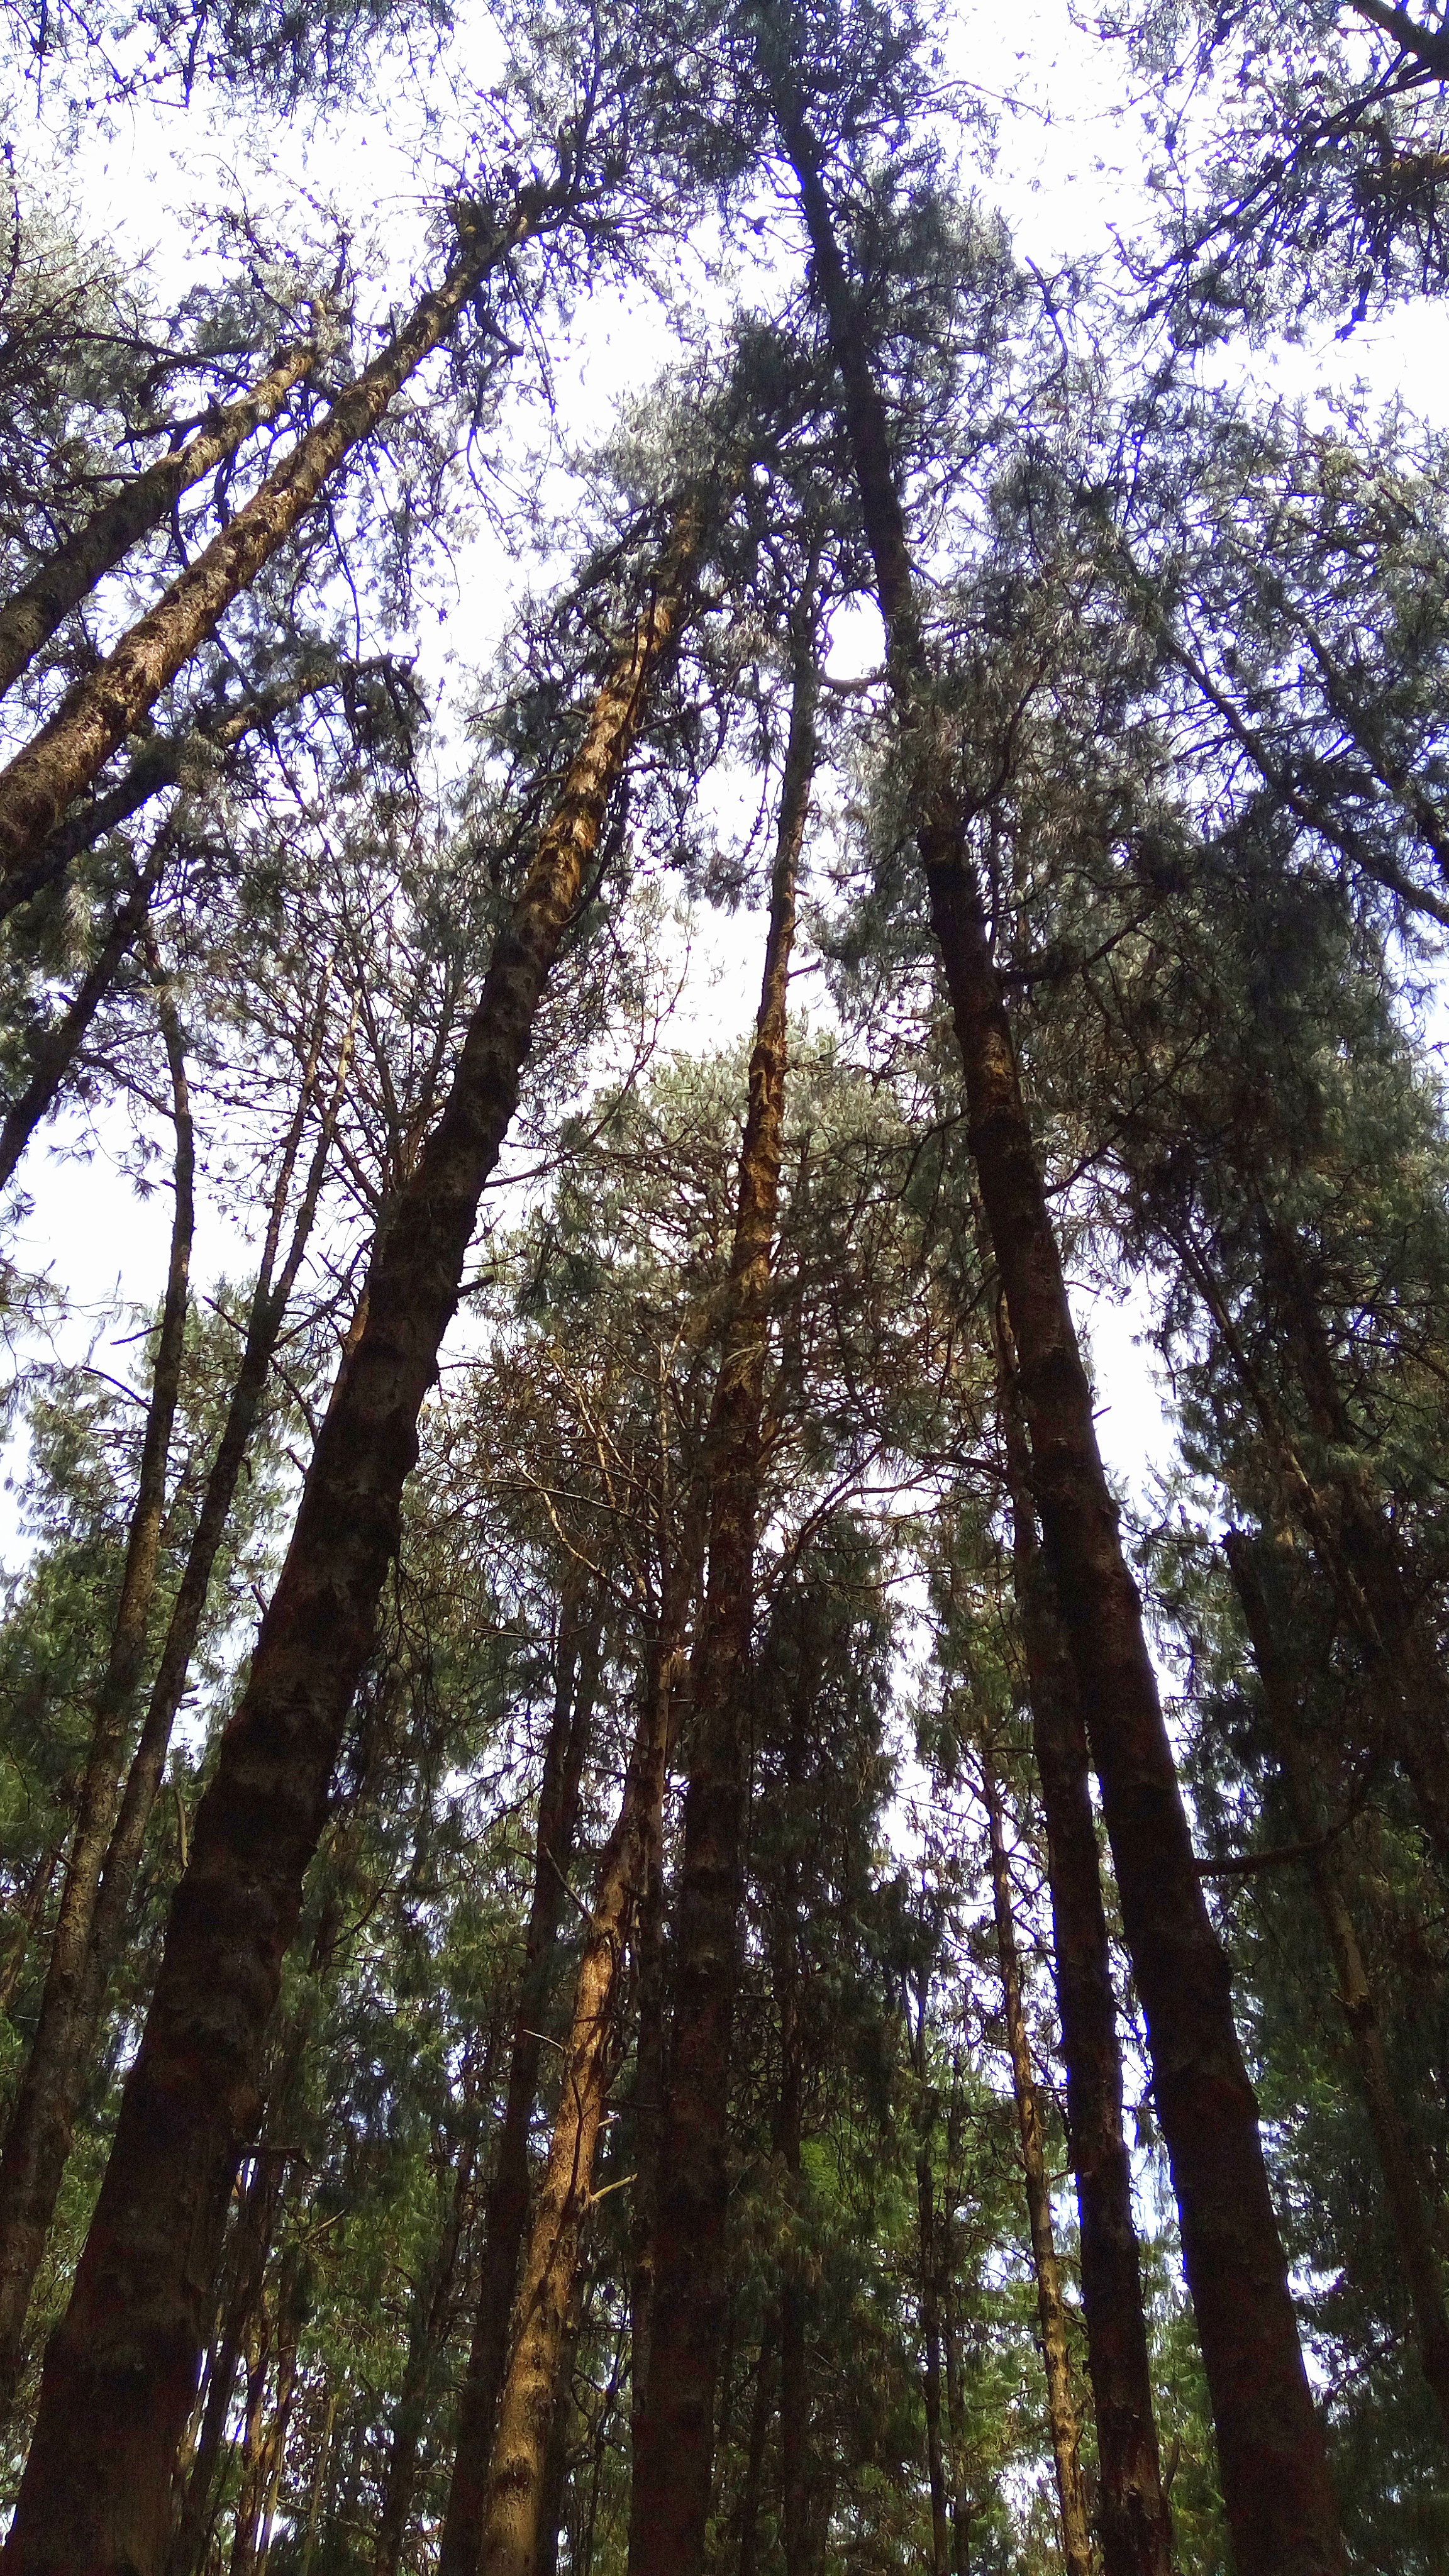 Scale Your Growth - An upward view of Scaling Heights of Towering Trees